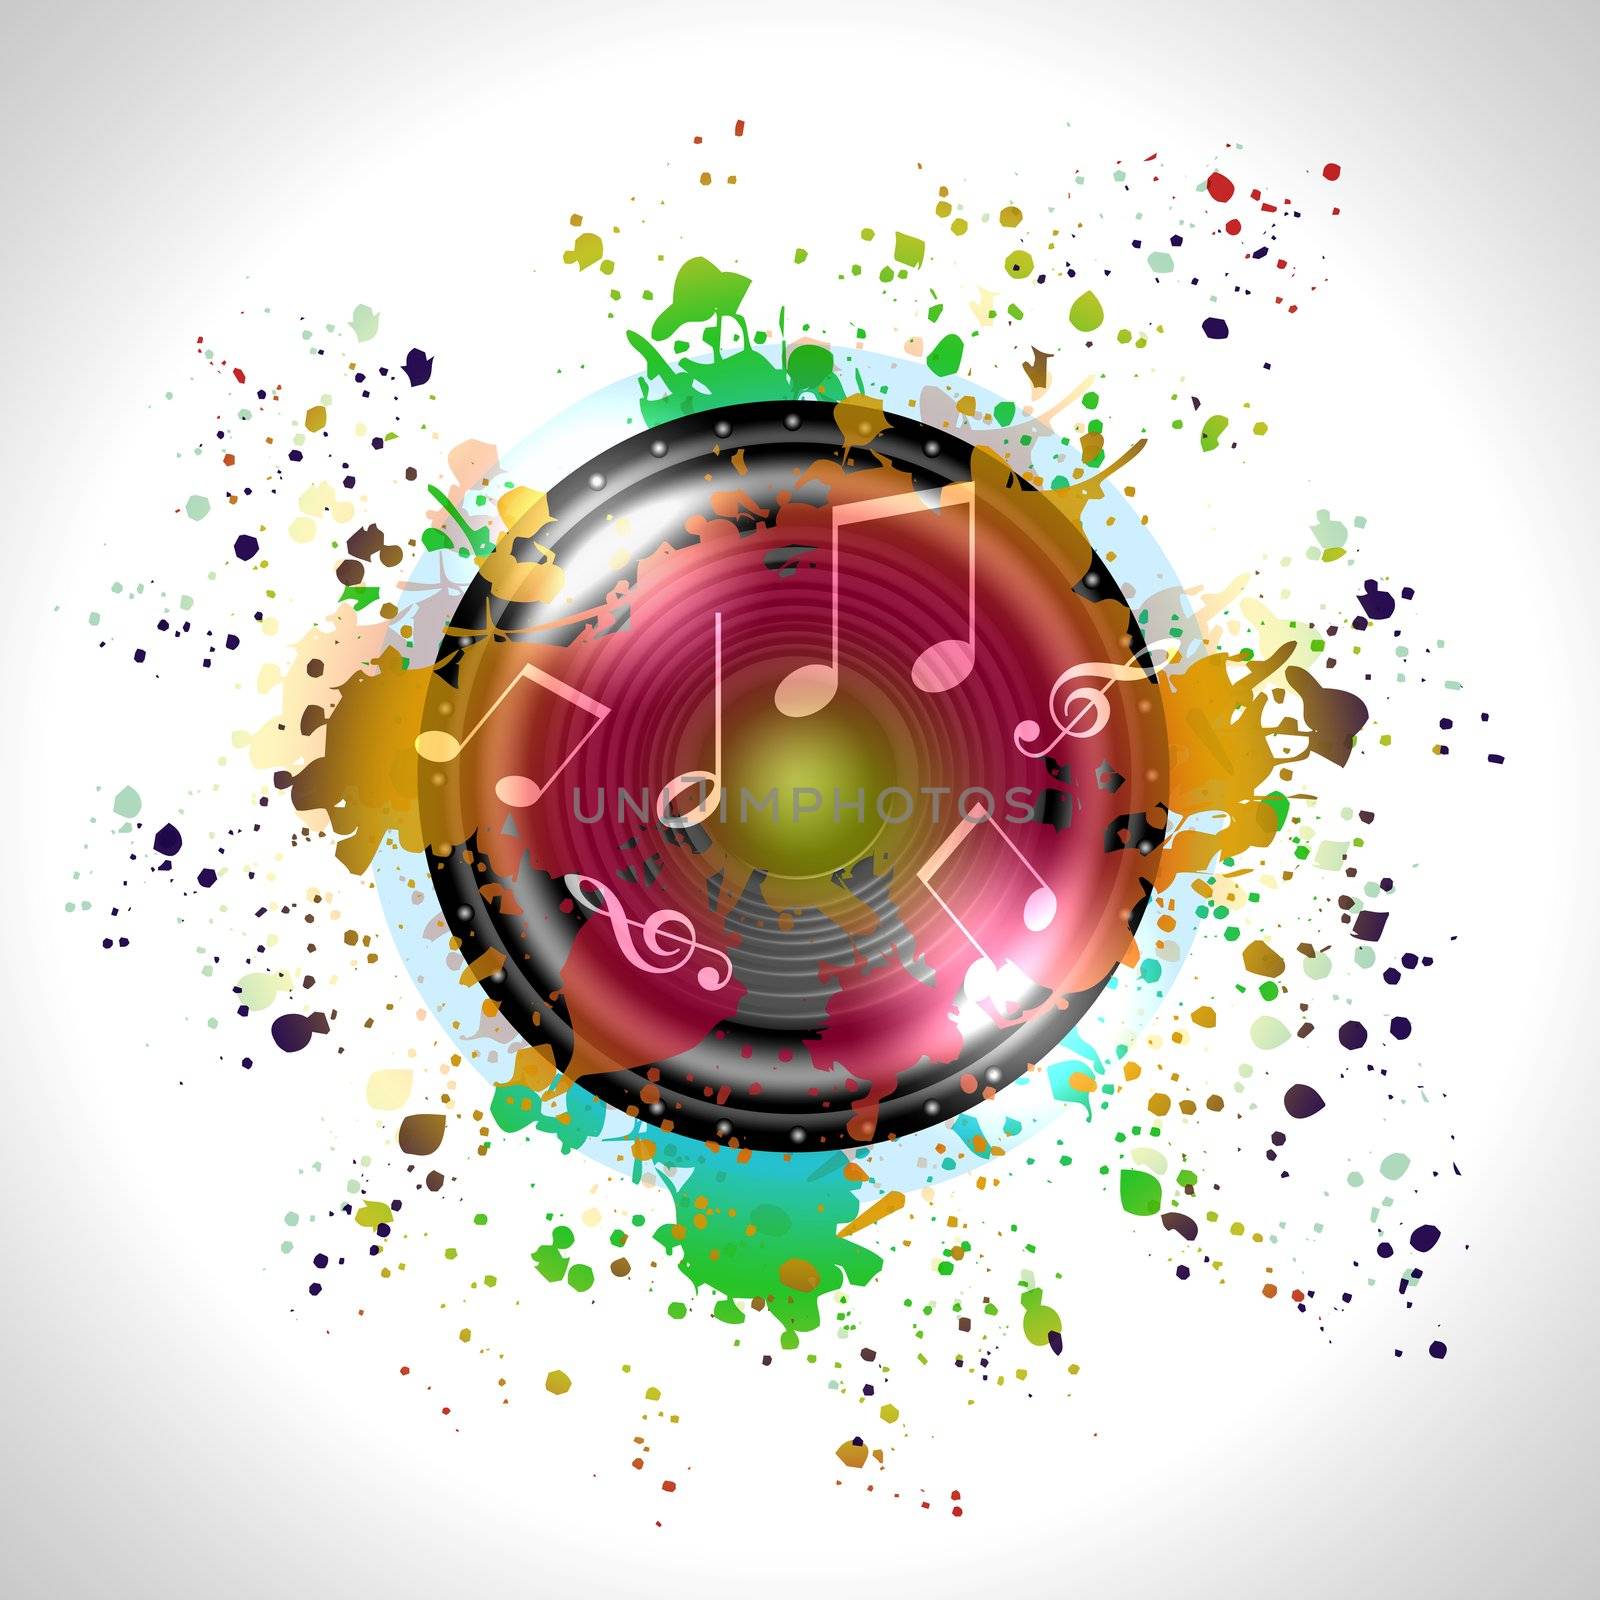 Image of music speaker against colourful background